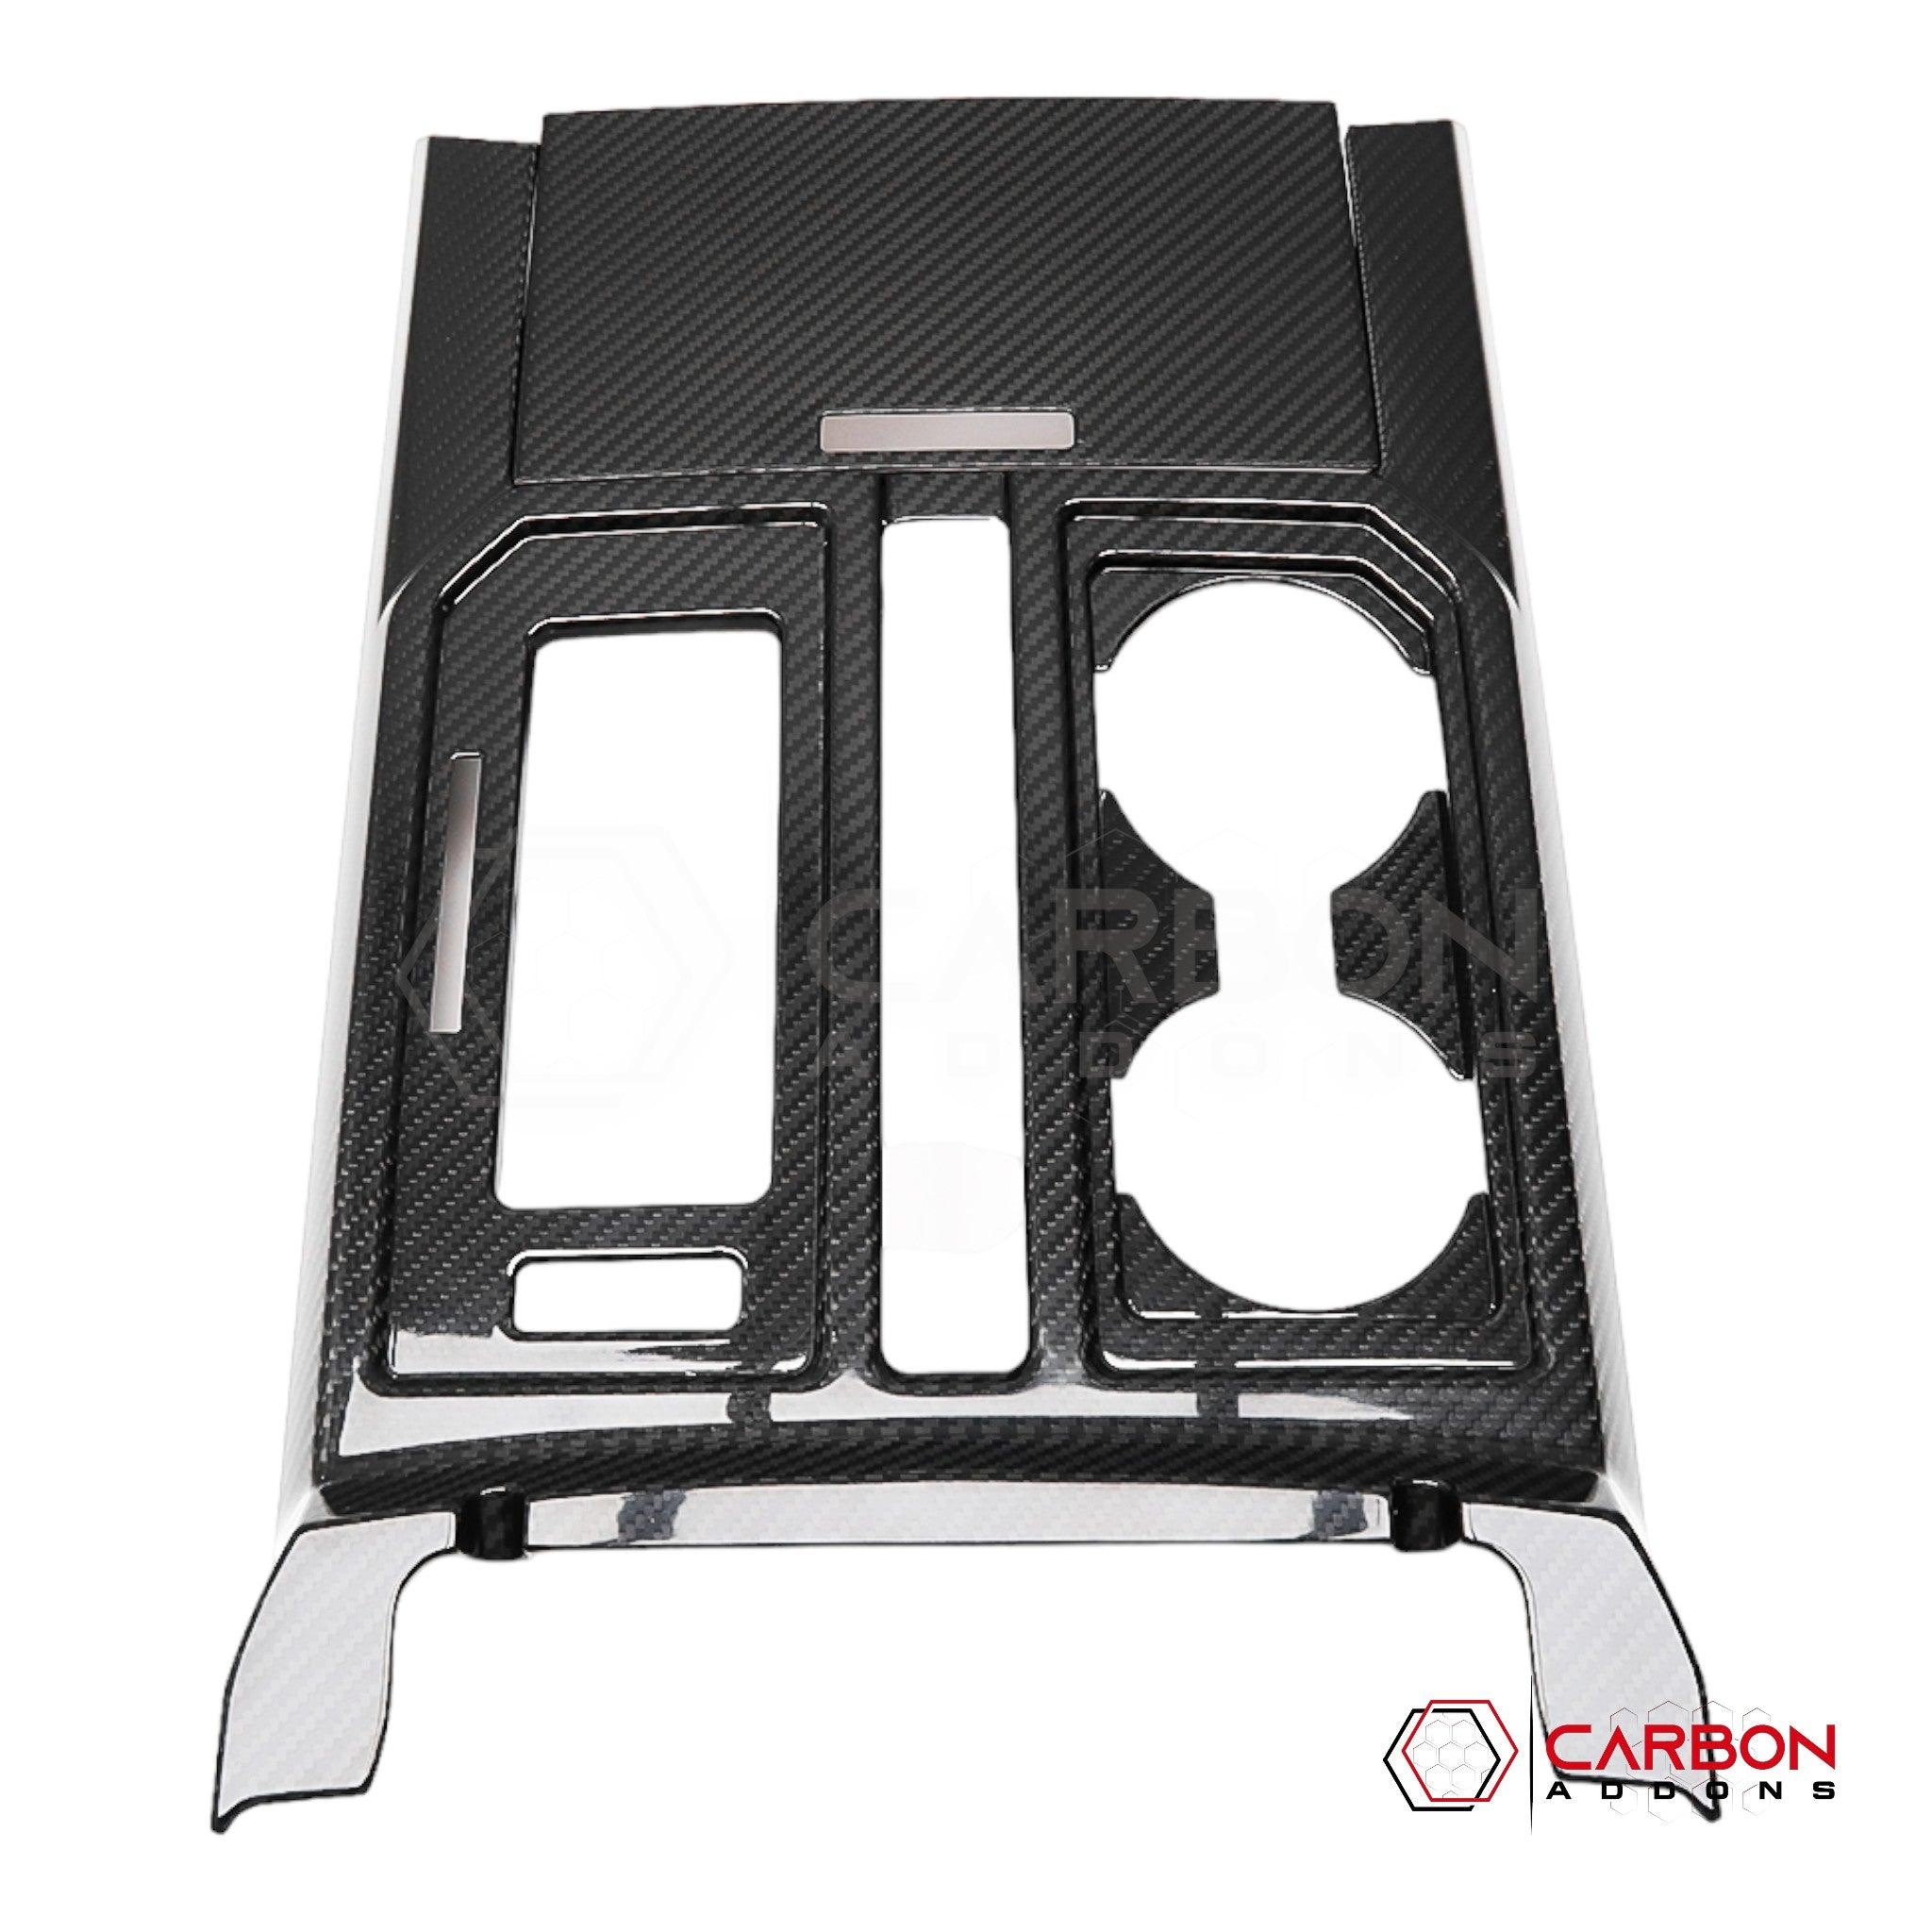 [Coming Soon] Ford F150 2015-2020 Center Console Gear Shift Panel Hard Carbon Fiber Cover - carbonaddons Carbon Fiber Parts, Accessories, Upgrades, Mods